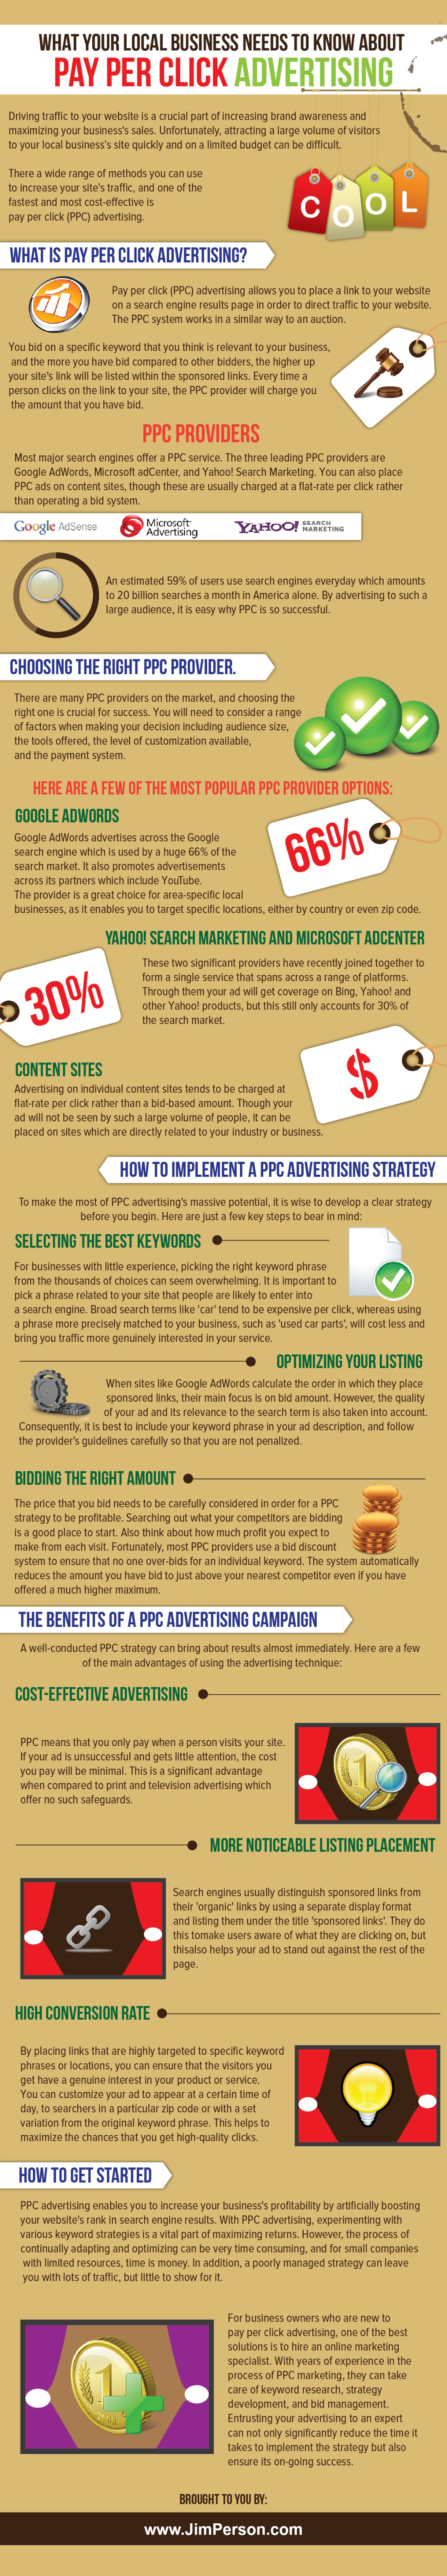 You are currently viewing Infographic: What Your Business Needs to Know About Pay Per Click Advertising